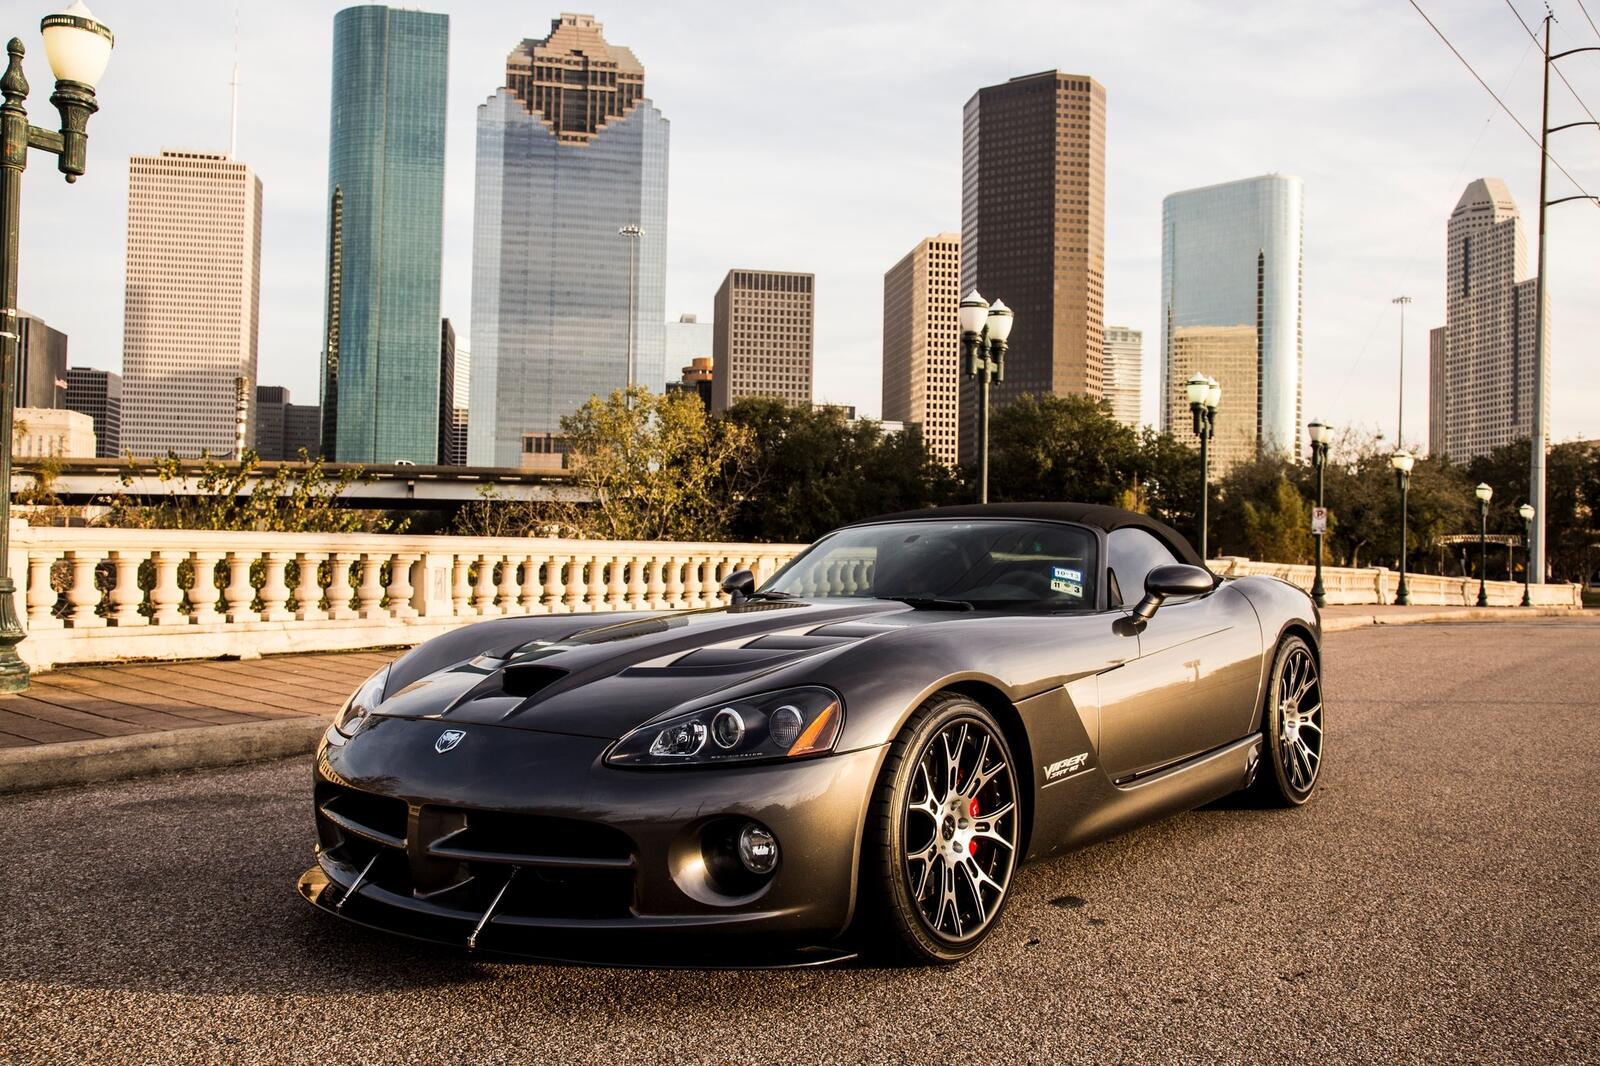 Free photo Dodge viper convertible against a backdrop of skyscrapers.